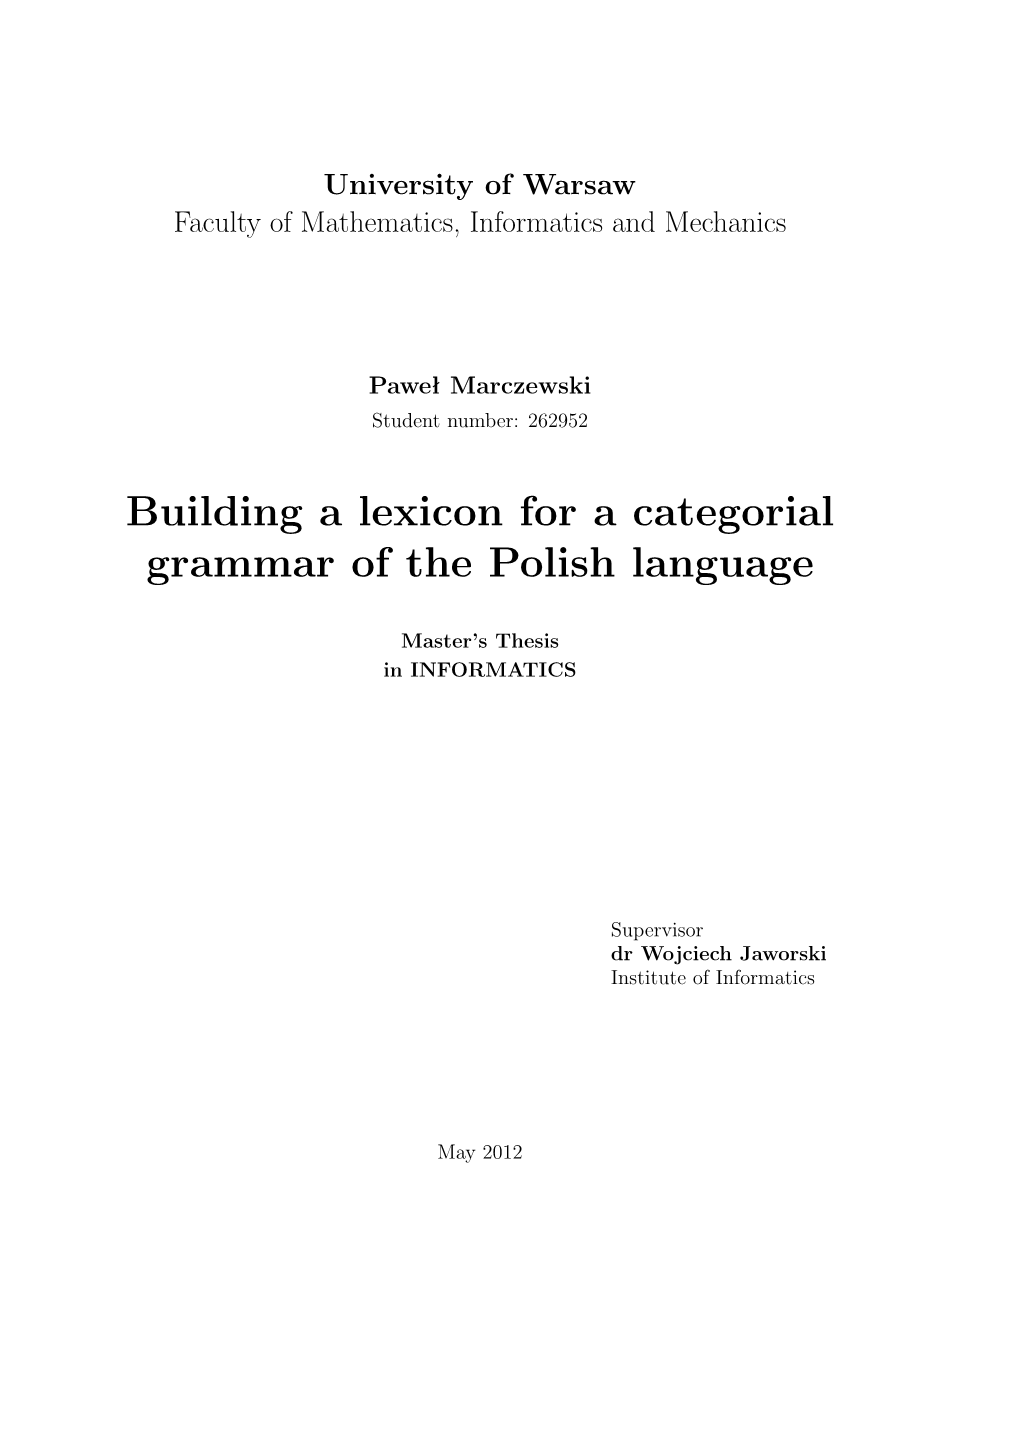 Building a Lexicon for a Categorial Grammar of the Polish Language